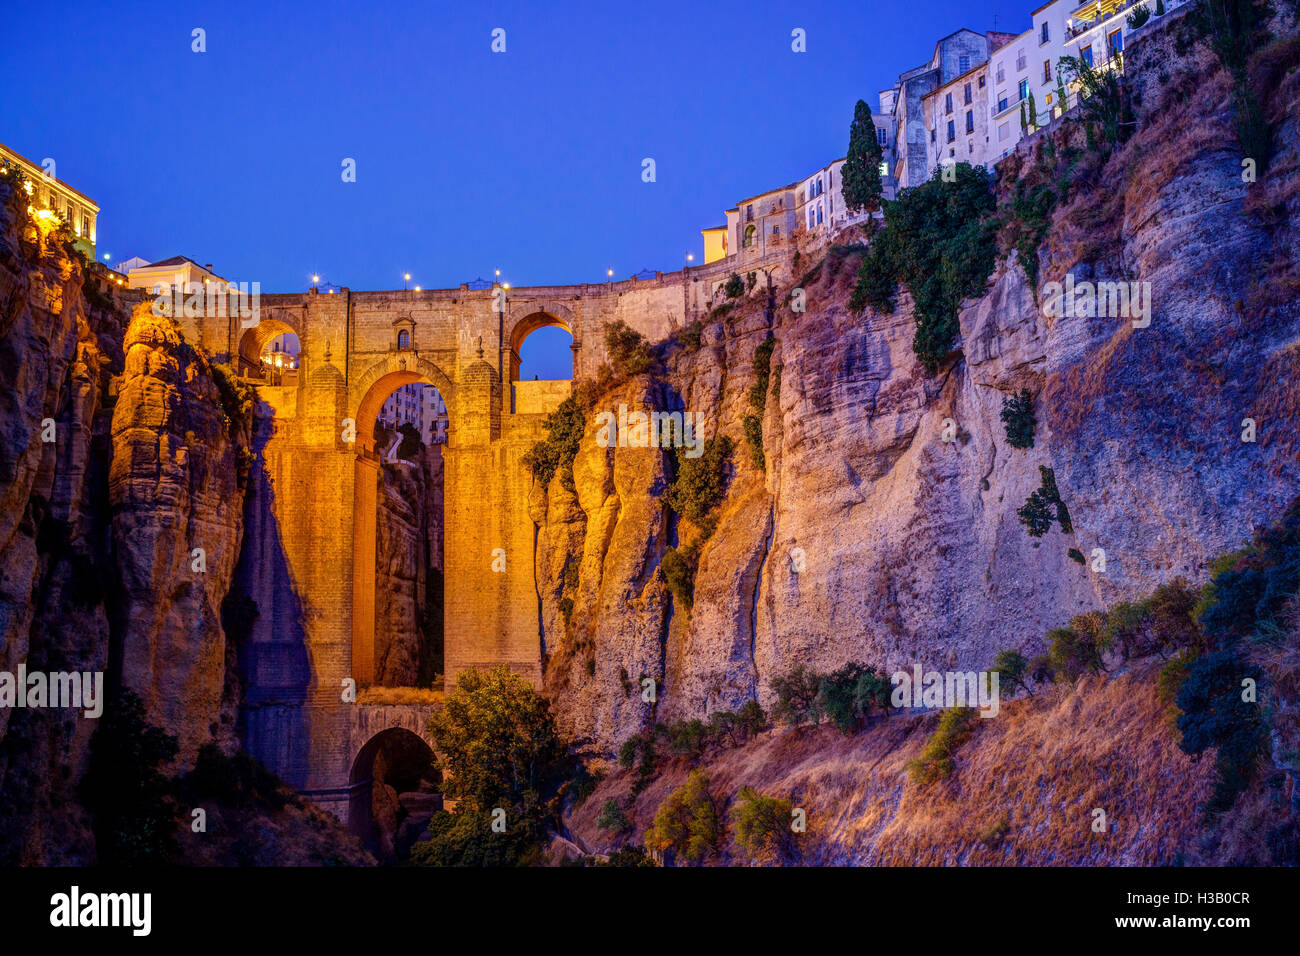 Ronda in Andalusia, Spain Stock Photo